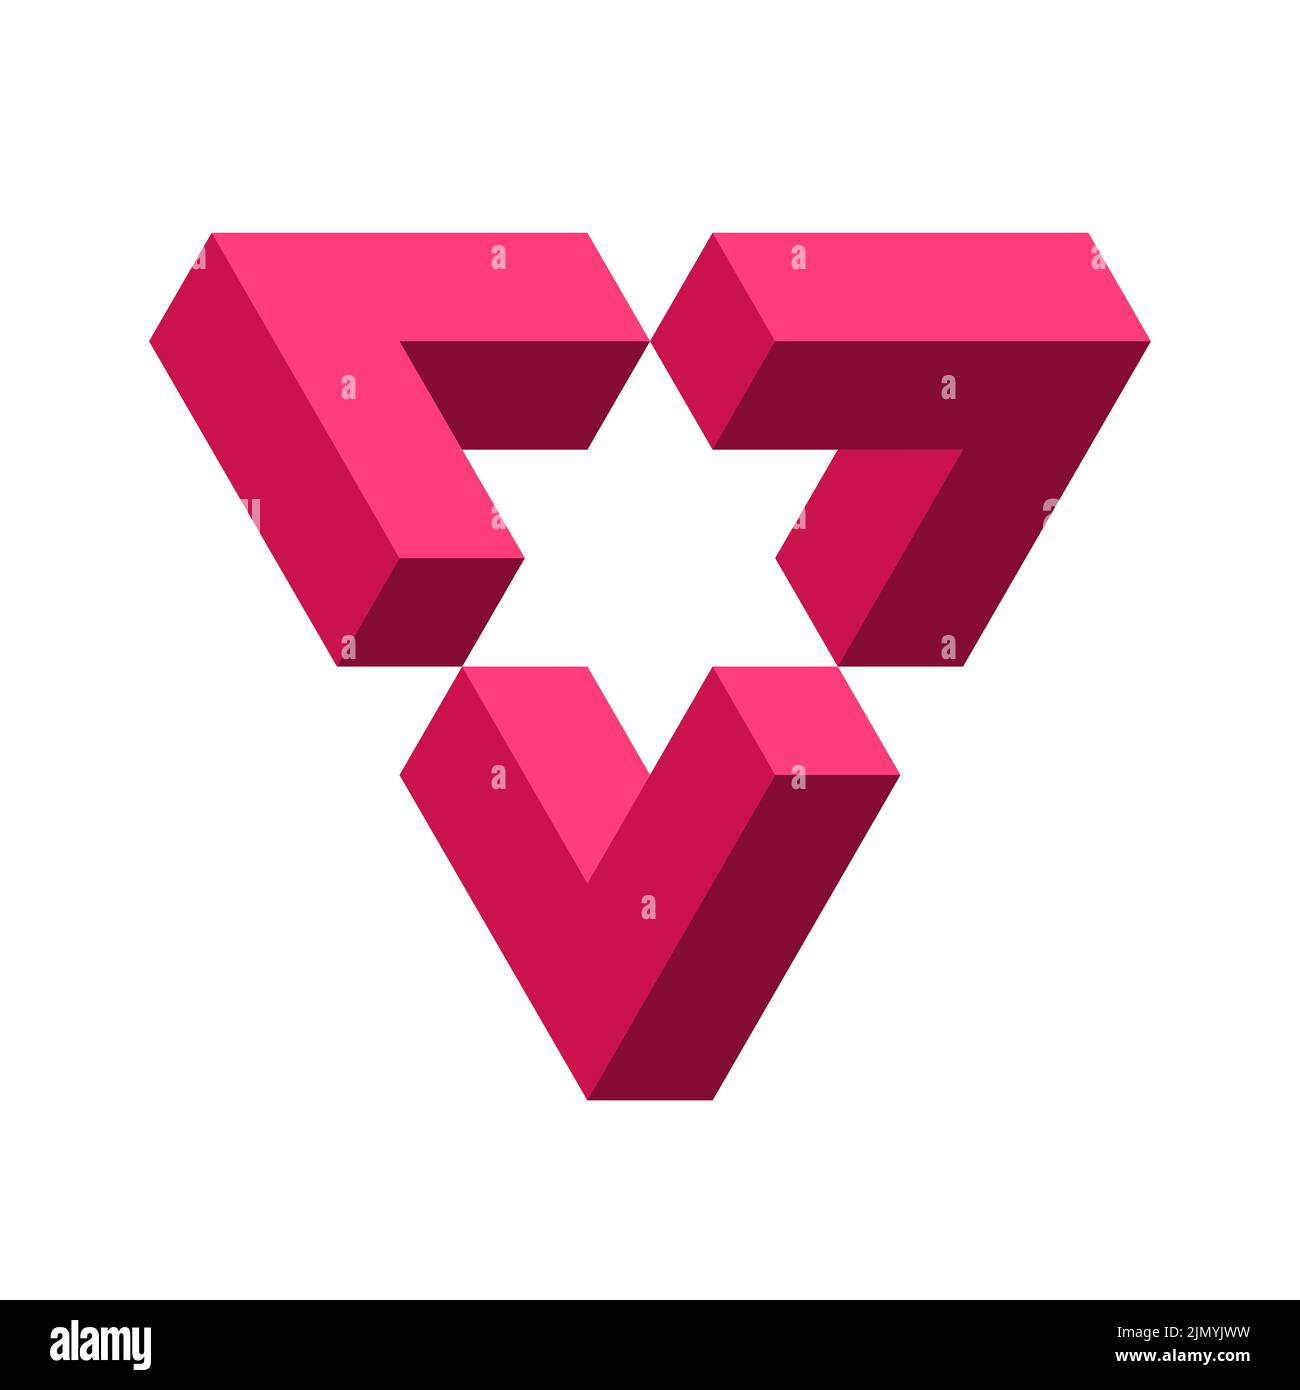 Impossible red triangle. Penrose shape. Esher geometric object. Optical illusion visual effect. Logo template made of three symmetric parts with star. Stock Vector